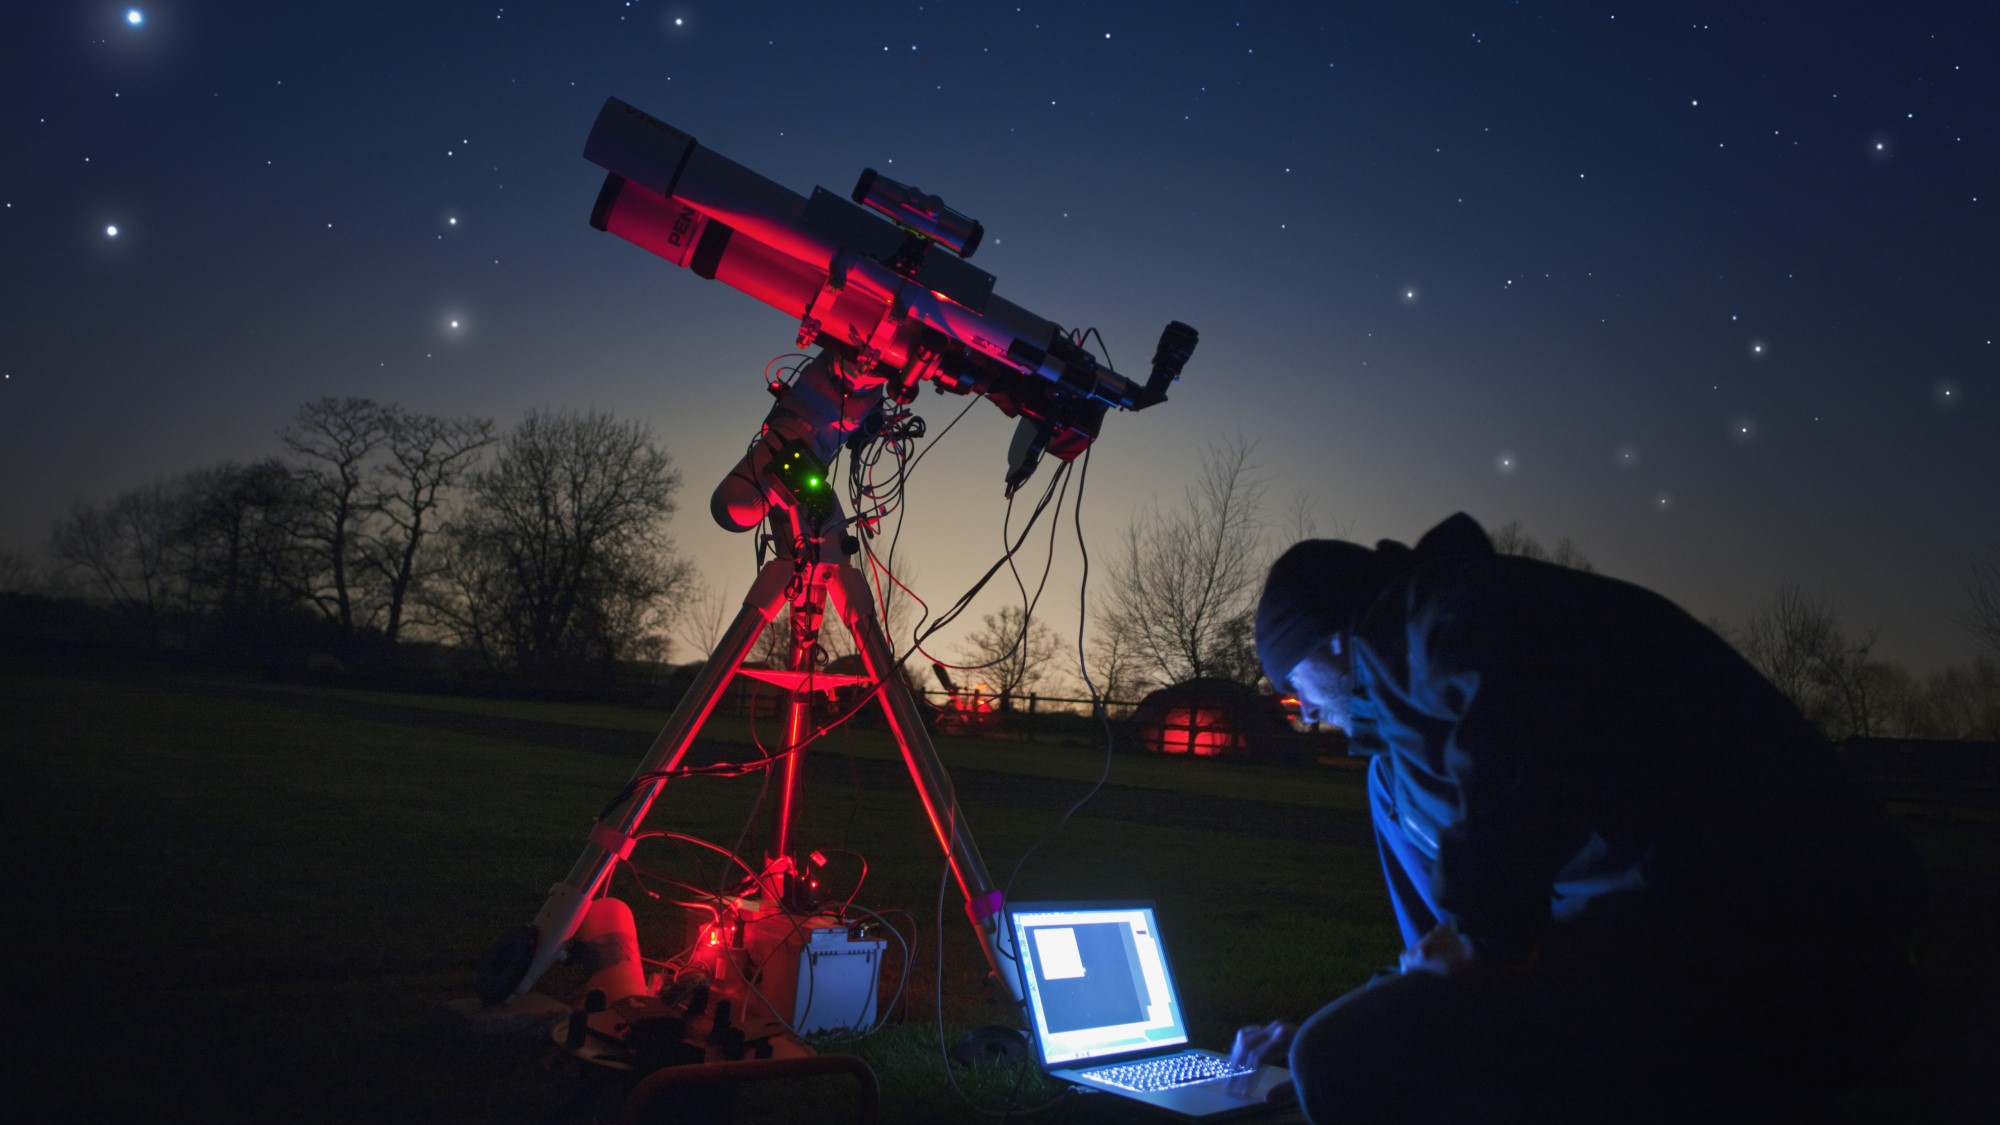 Almost anyone can become an amateur astronomer. What will you find?